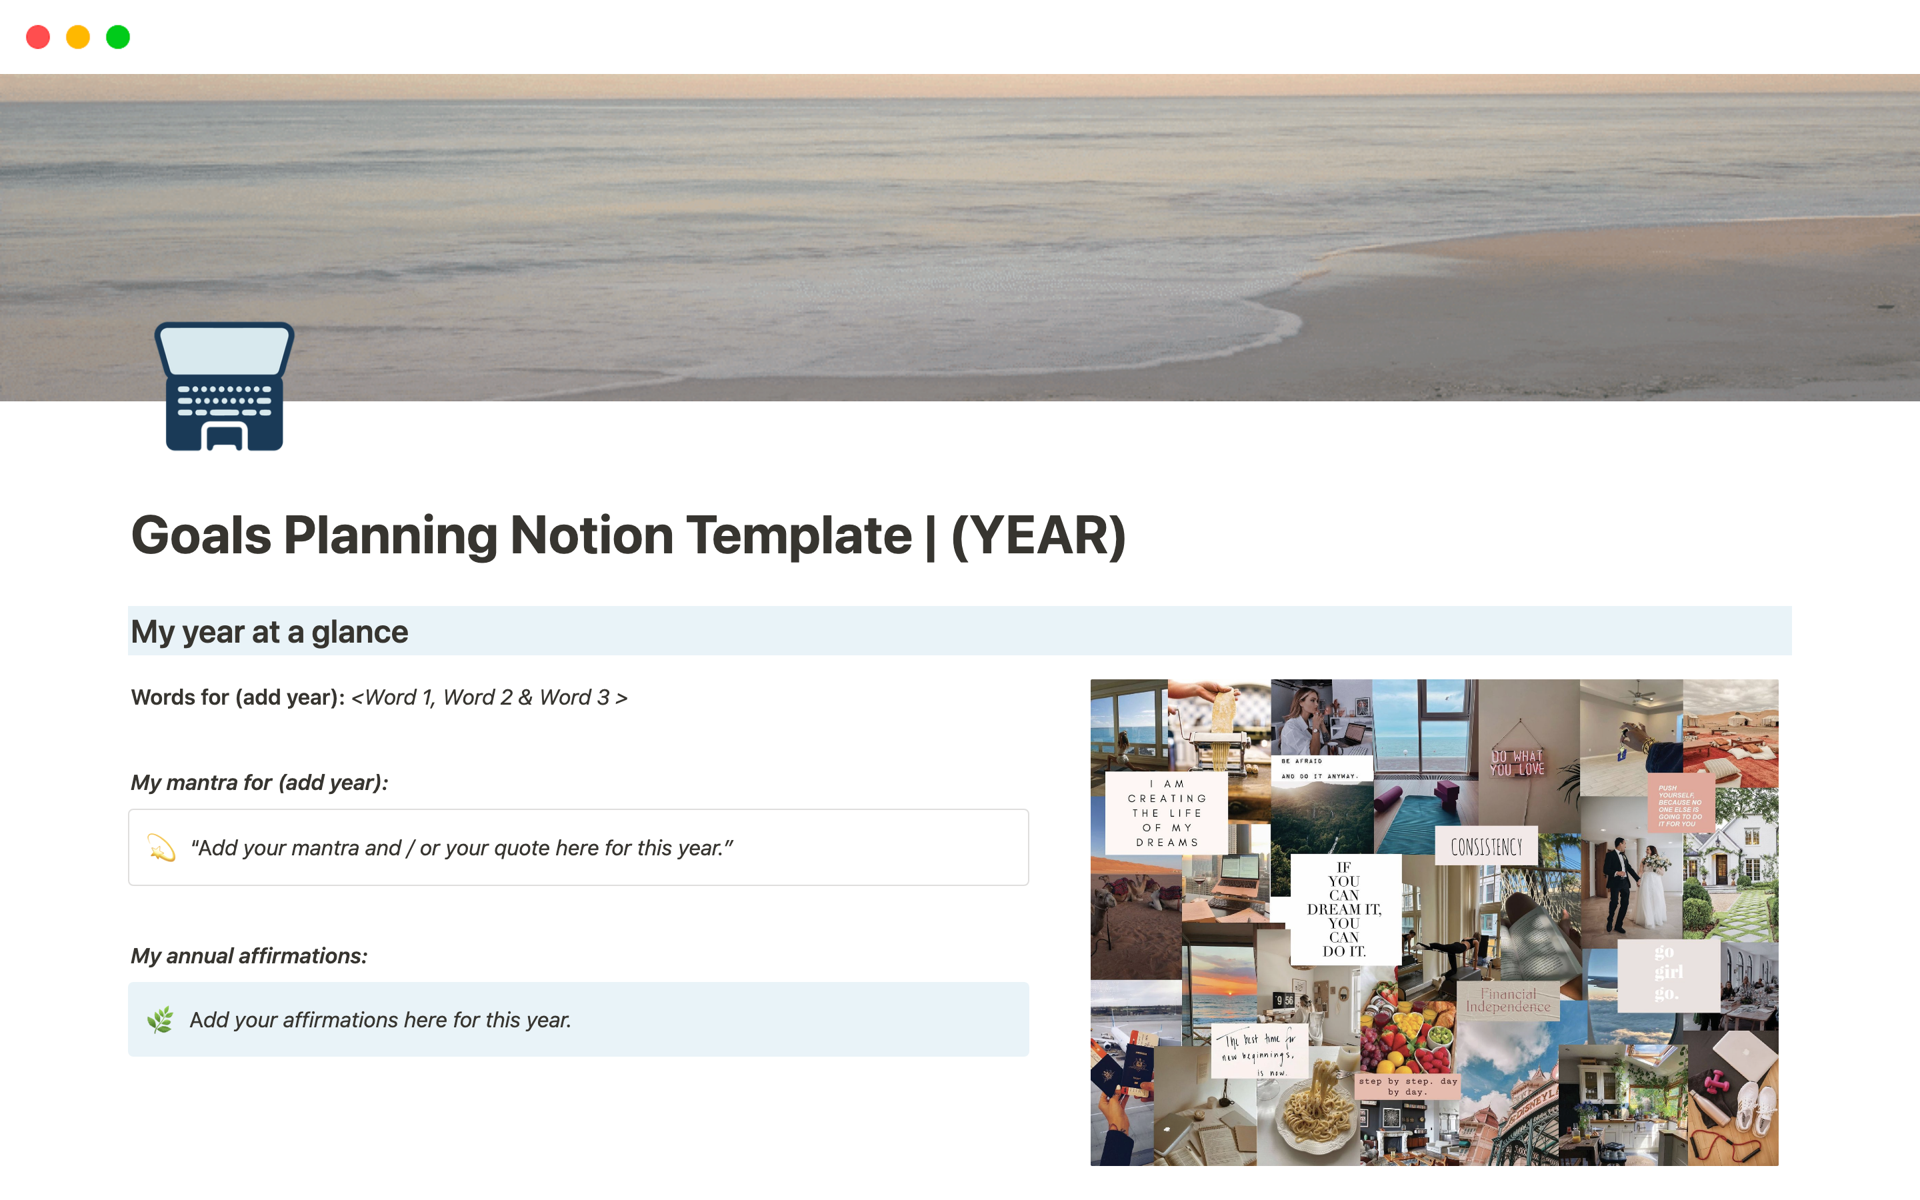 Elevate your year with our Goals Planning Notion Template! 